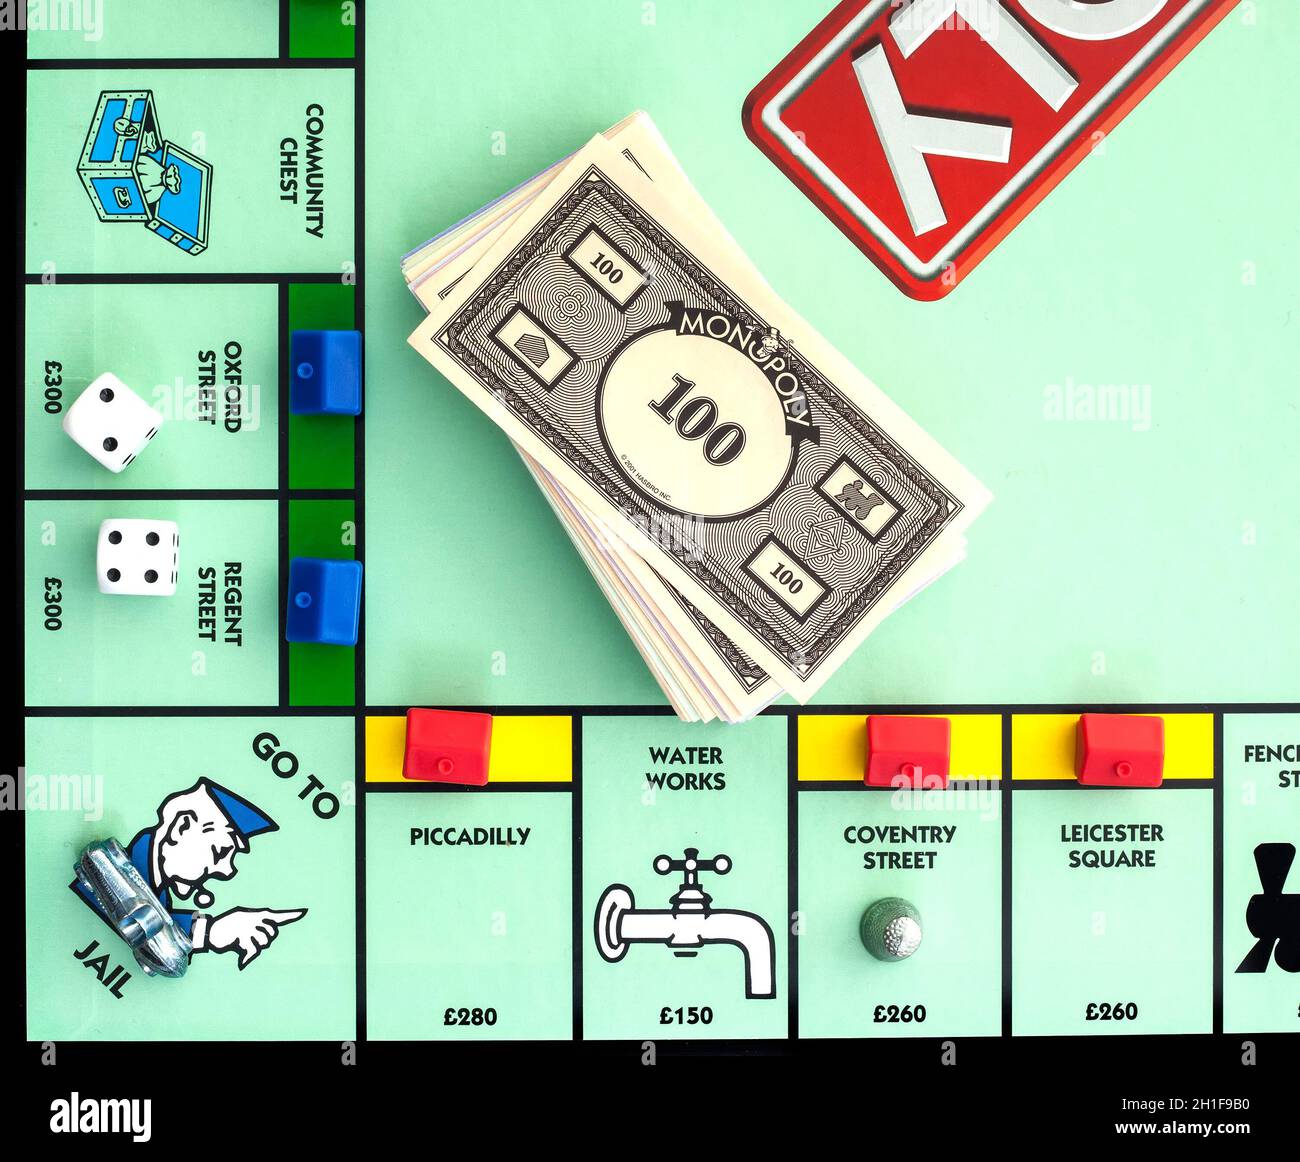 SWINDON, UK - JUNE 11, 2014: English Edition of Monopoly showing The Jail,  The classic trading game from Parker Brothers was first introduced to Amer Stock Photo